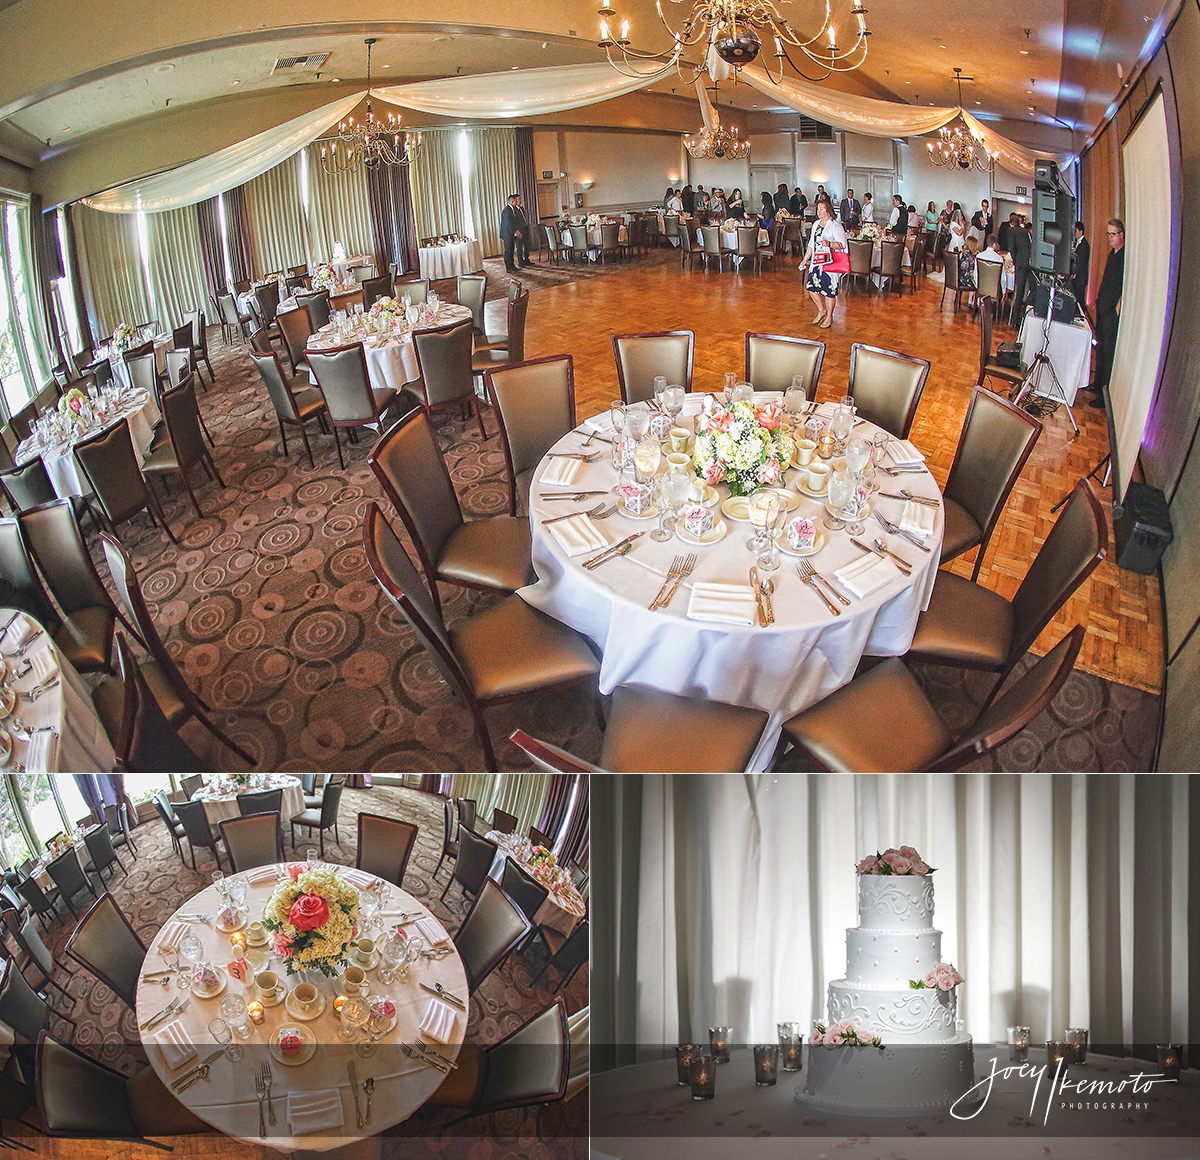 Los-Angeles-California-Temple-Westwood-and-Odyessy-Restaurant-Wedding_0033_Blog-Collage-1466202801108